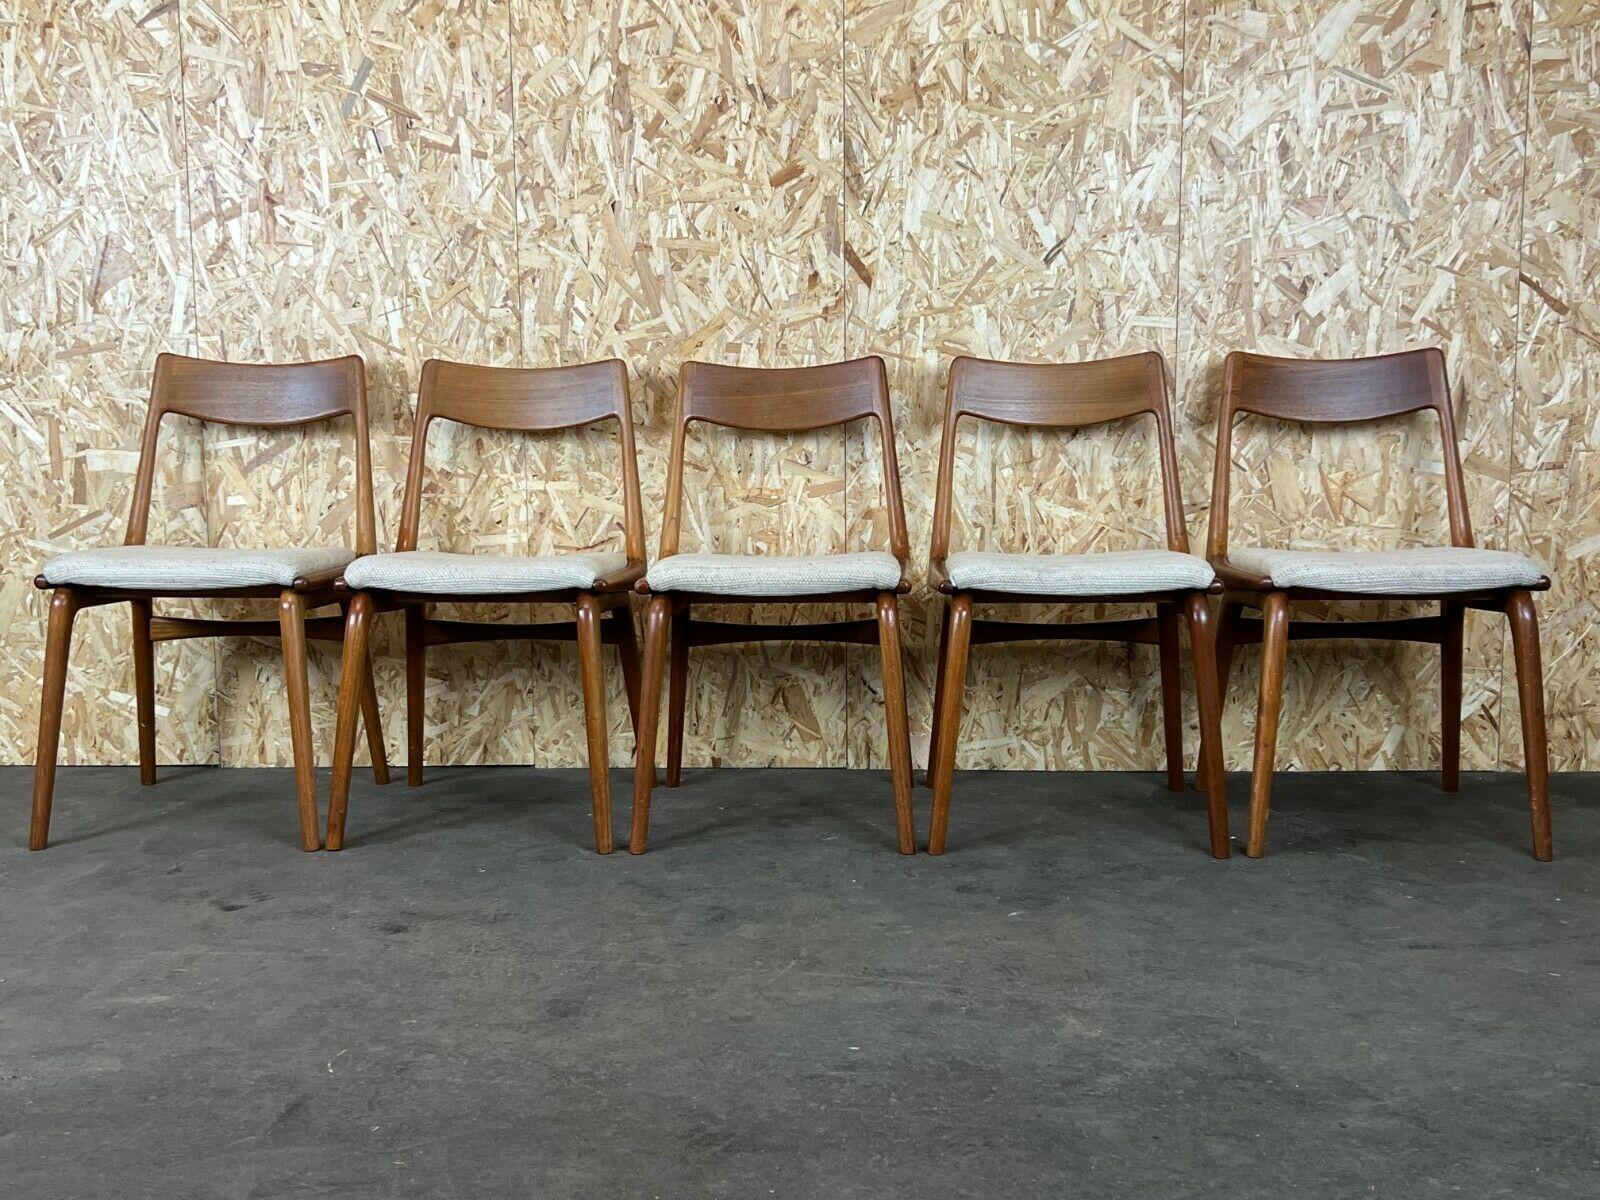 5x Boomerang Dining Chairs Alfred Christensen Slagelse Møbelværk Teak 60s 70s

Object: 5x chair

Manufacturer: Slagelse Møbelværk

Condition: good - vintage

Age: around 1960-1970

Dimensions:

47cm x 56cm x 80cm
Seat height =